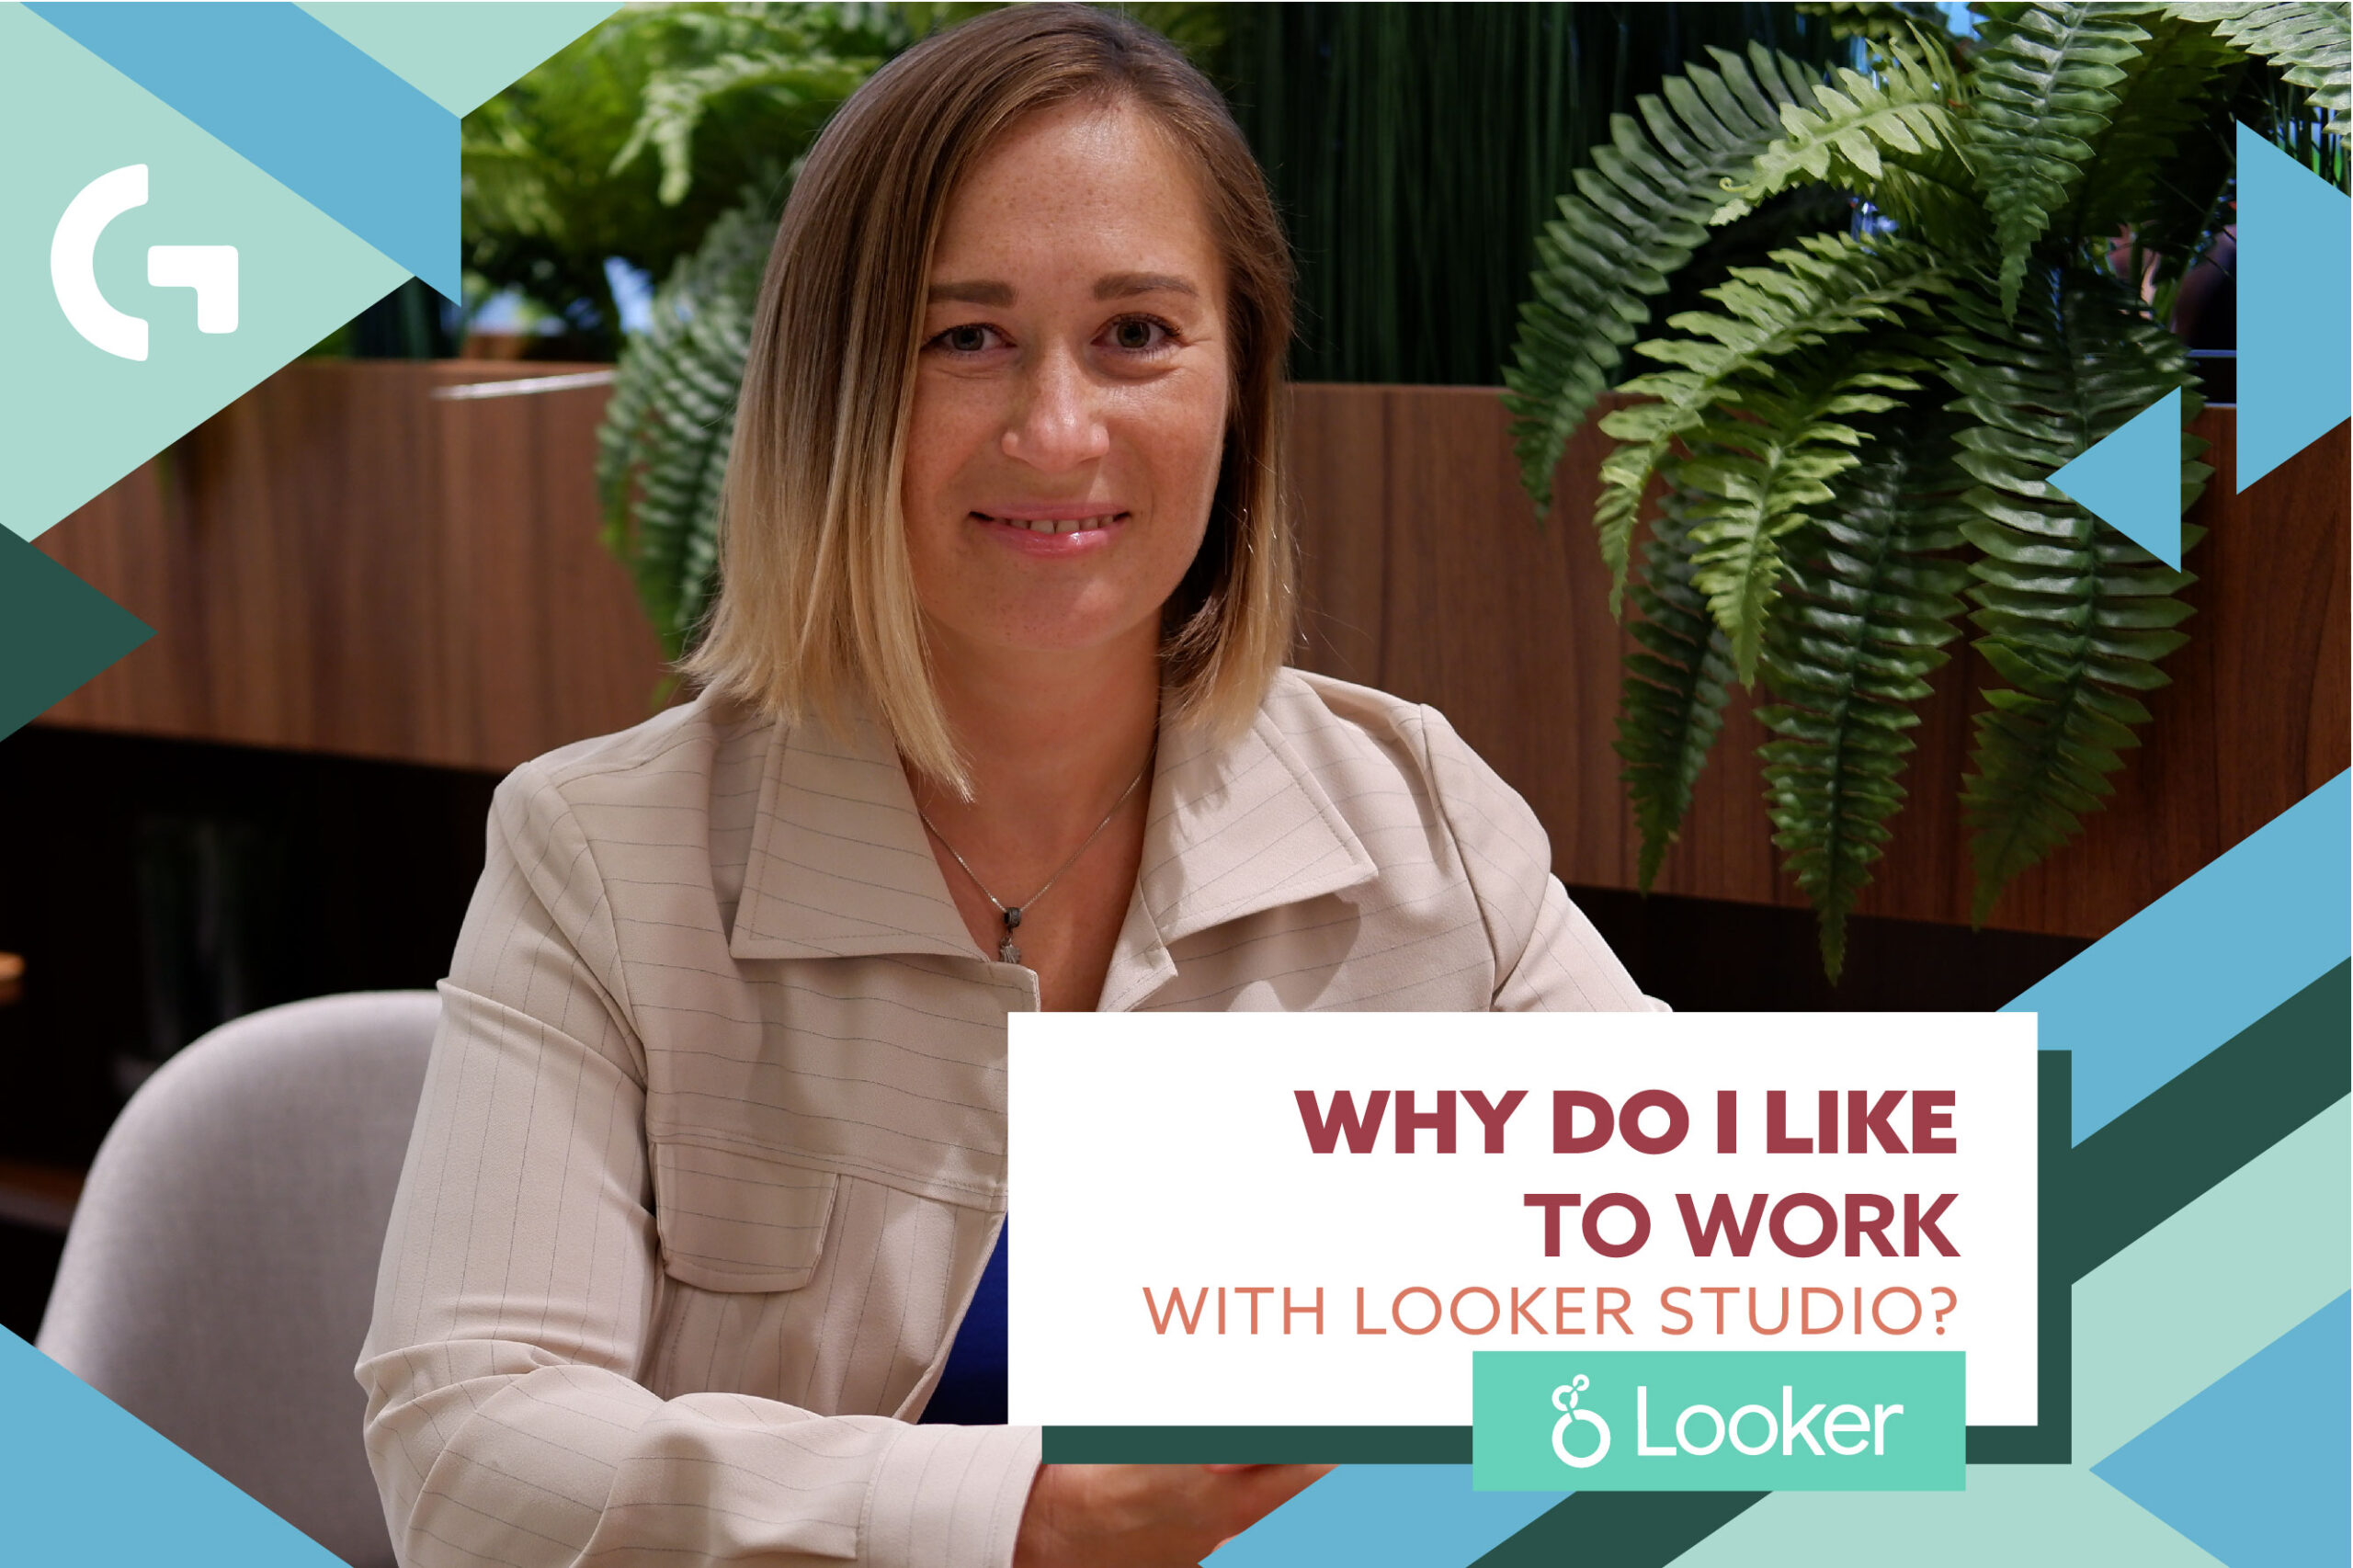 Why do I like to work with Looker Studio?